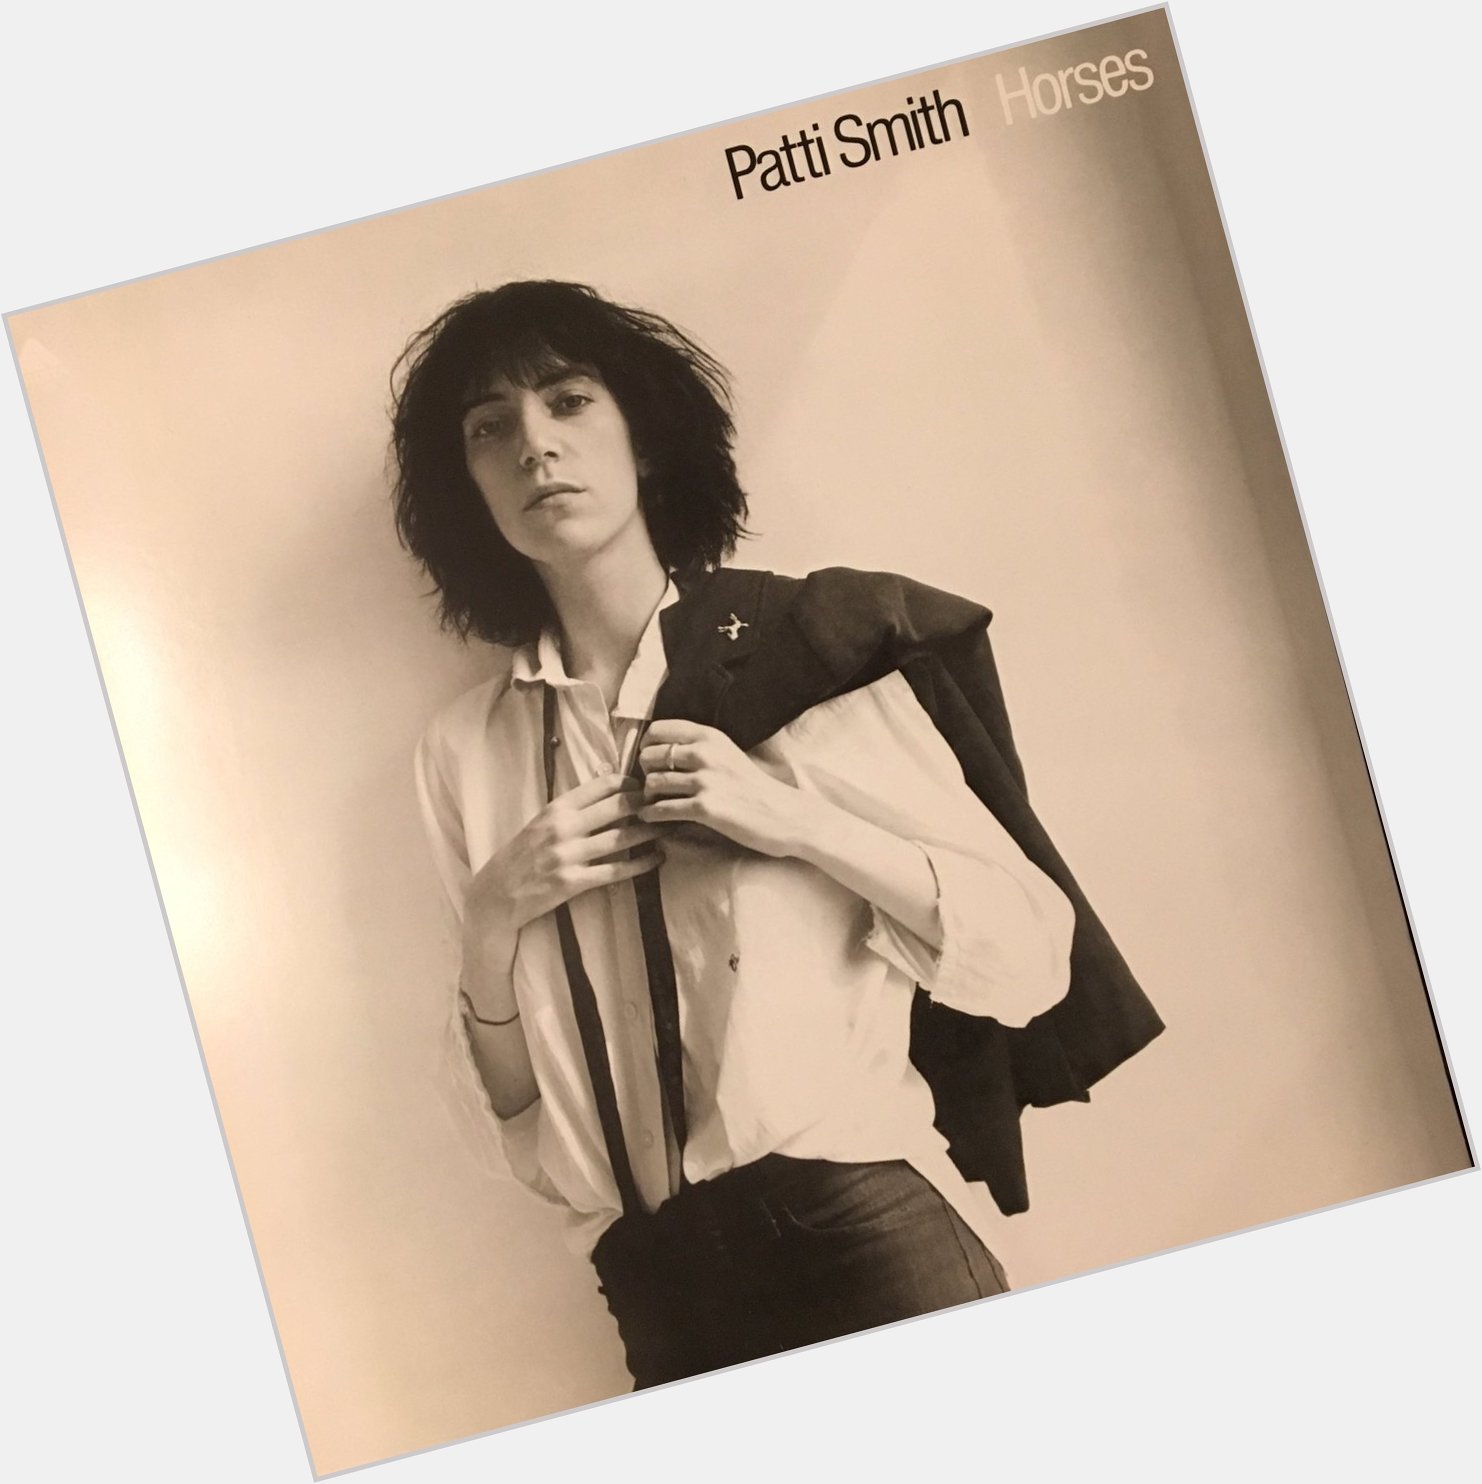 Happy birthday, Patti Smith! Thank you for a lifetime of inspiration and art. 